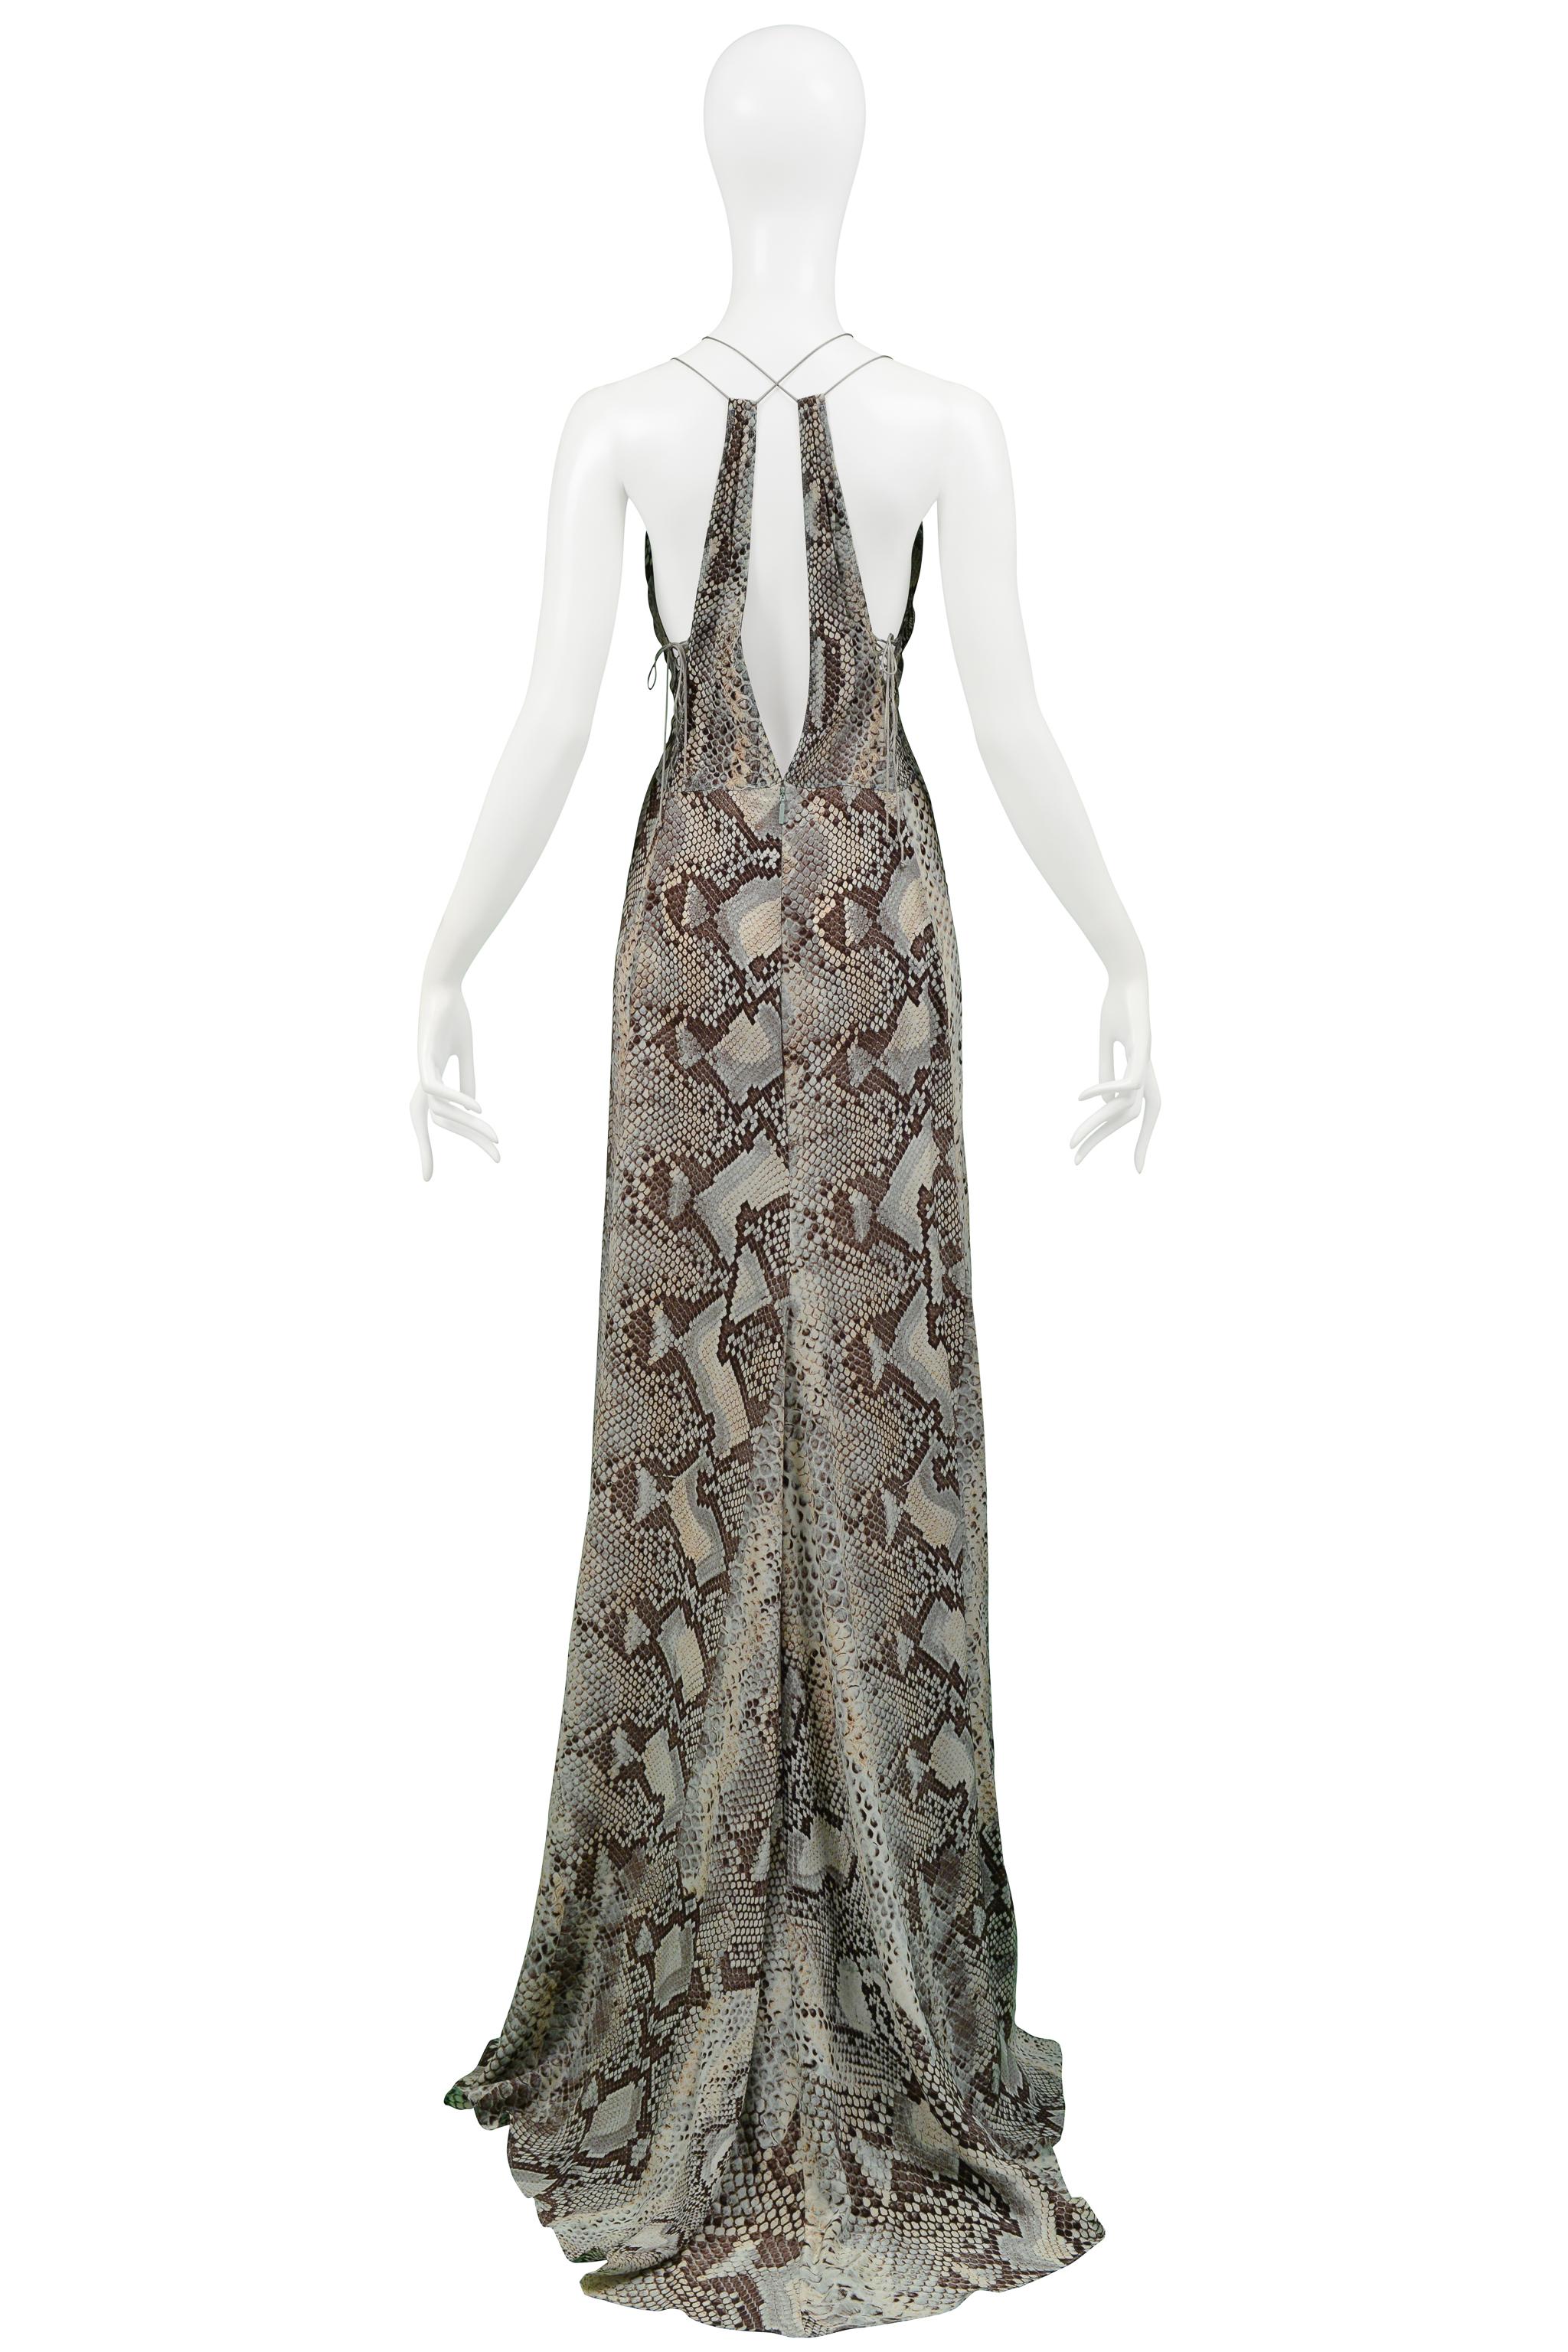 Roberto Cavalli Blue & Grey Snake Print Evening Gown With Silver Hardware 2011 For Sale 5